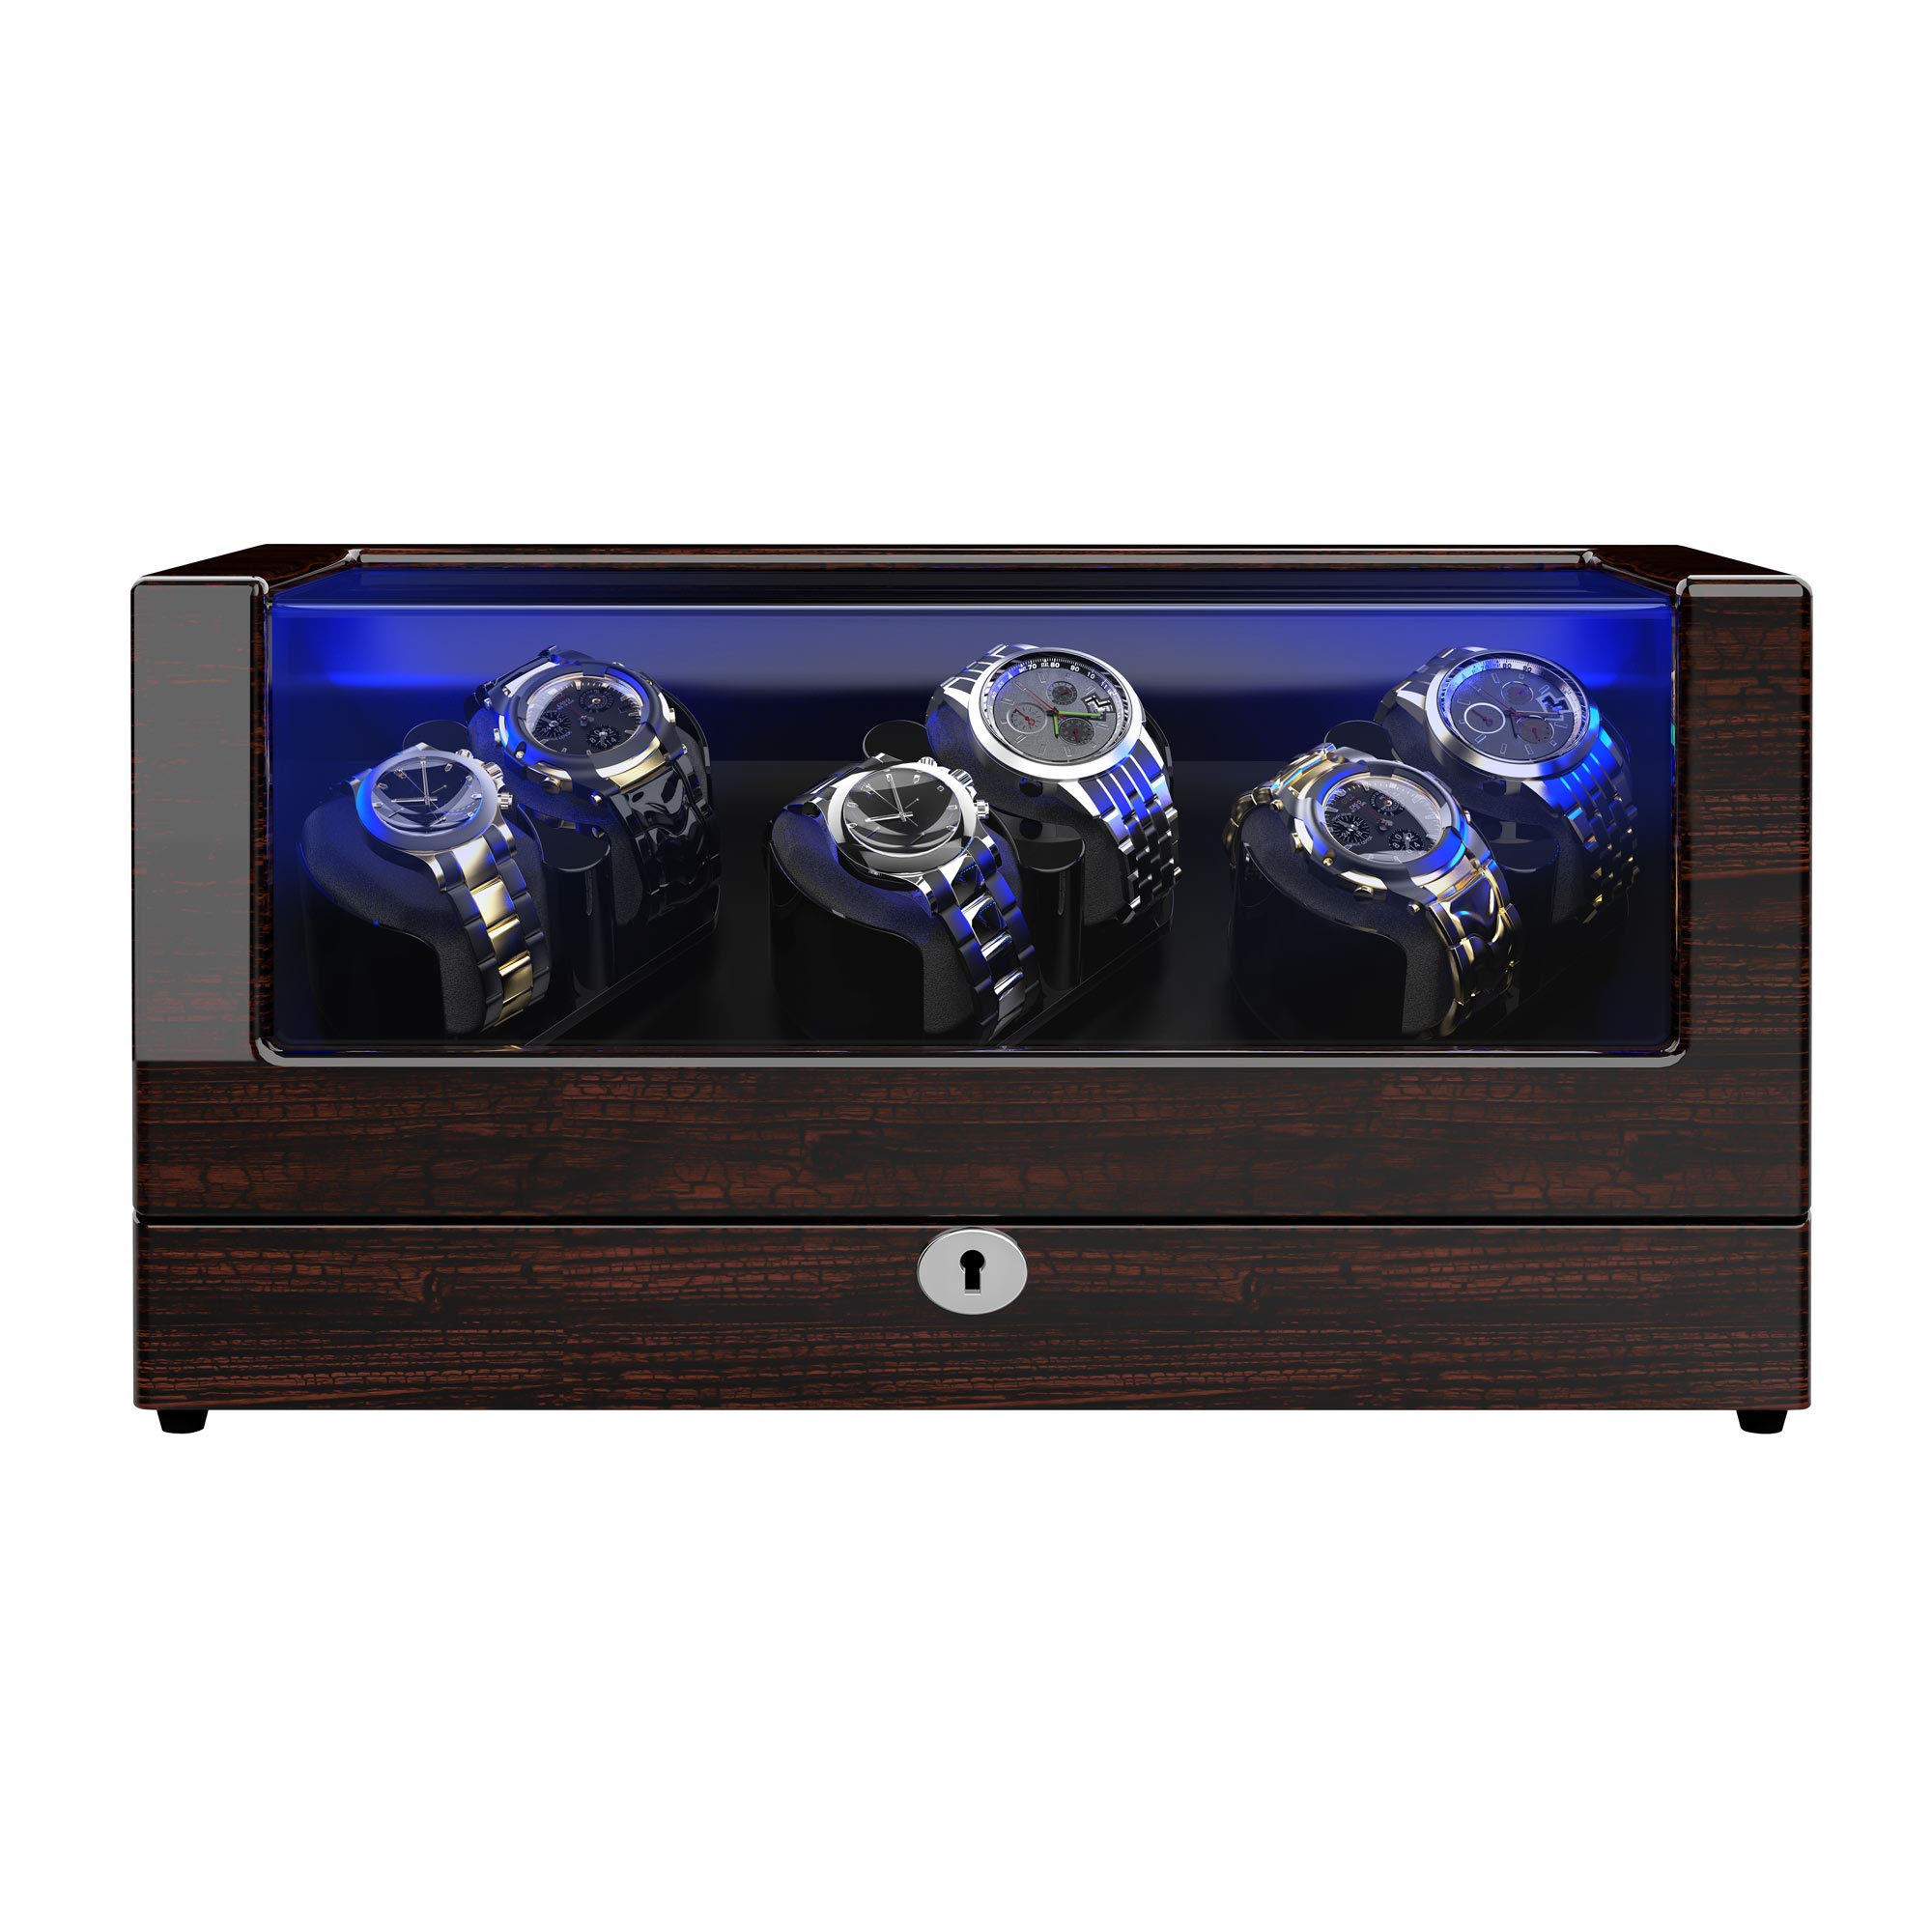 TRIPLE TREE Watch Winder, for Rolex Automatic Watches with Flexible Watch Pillows, Wooden Shell, Powered by Japanese Motor, Built-in LED Illuminated